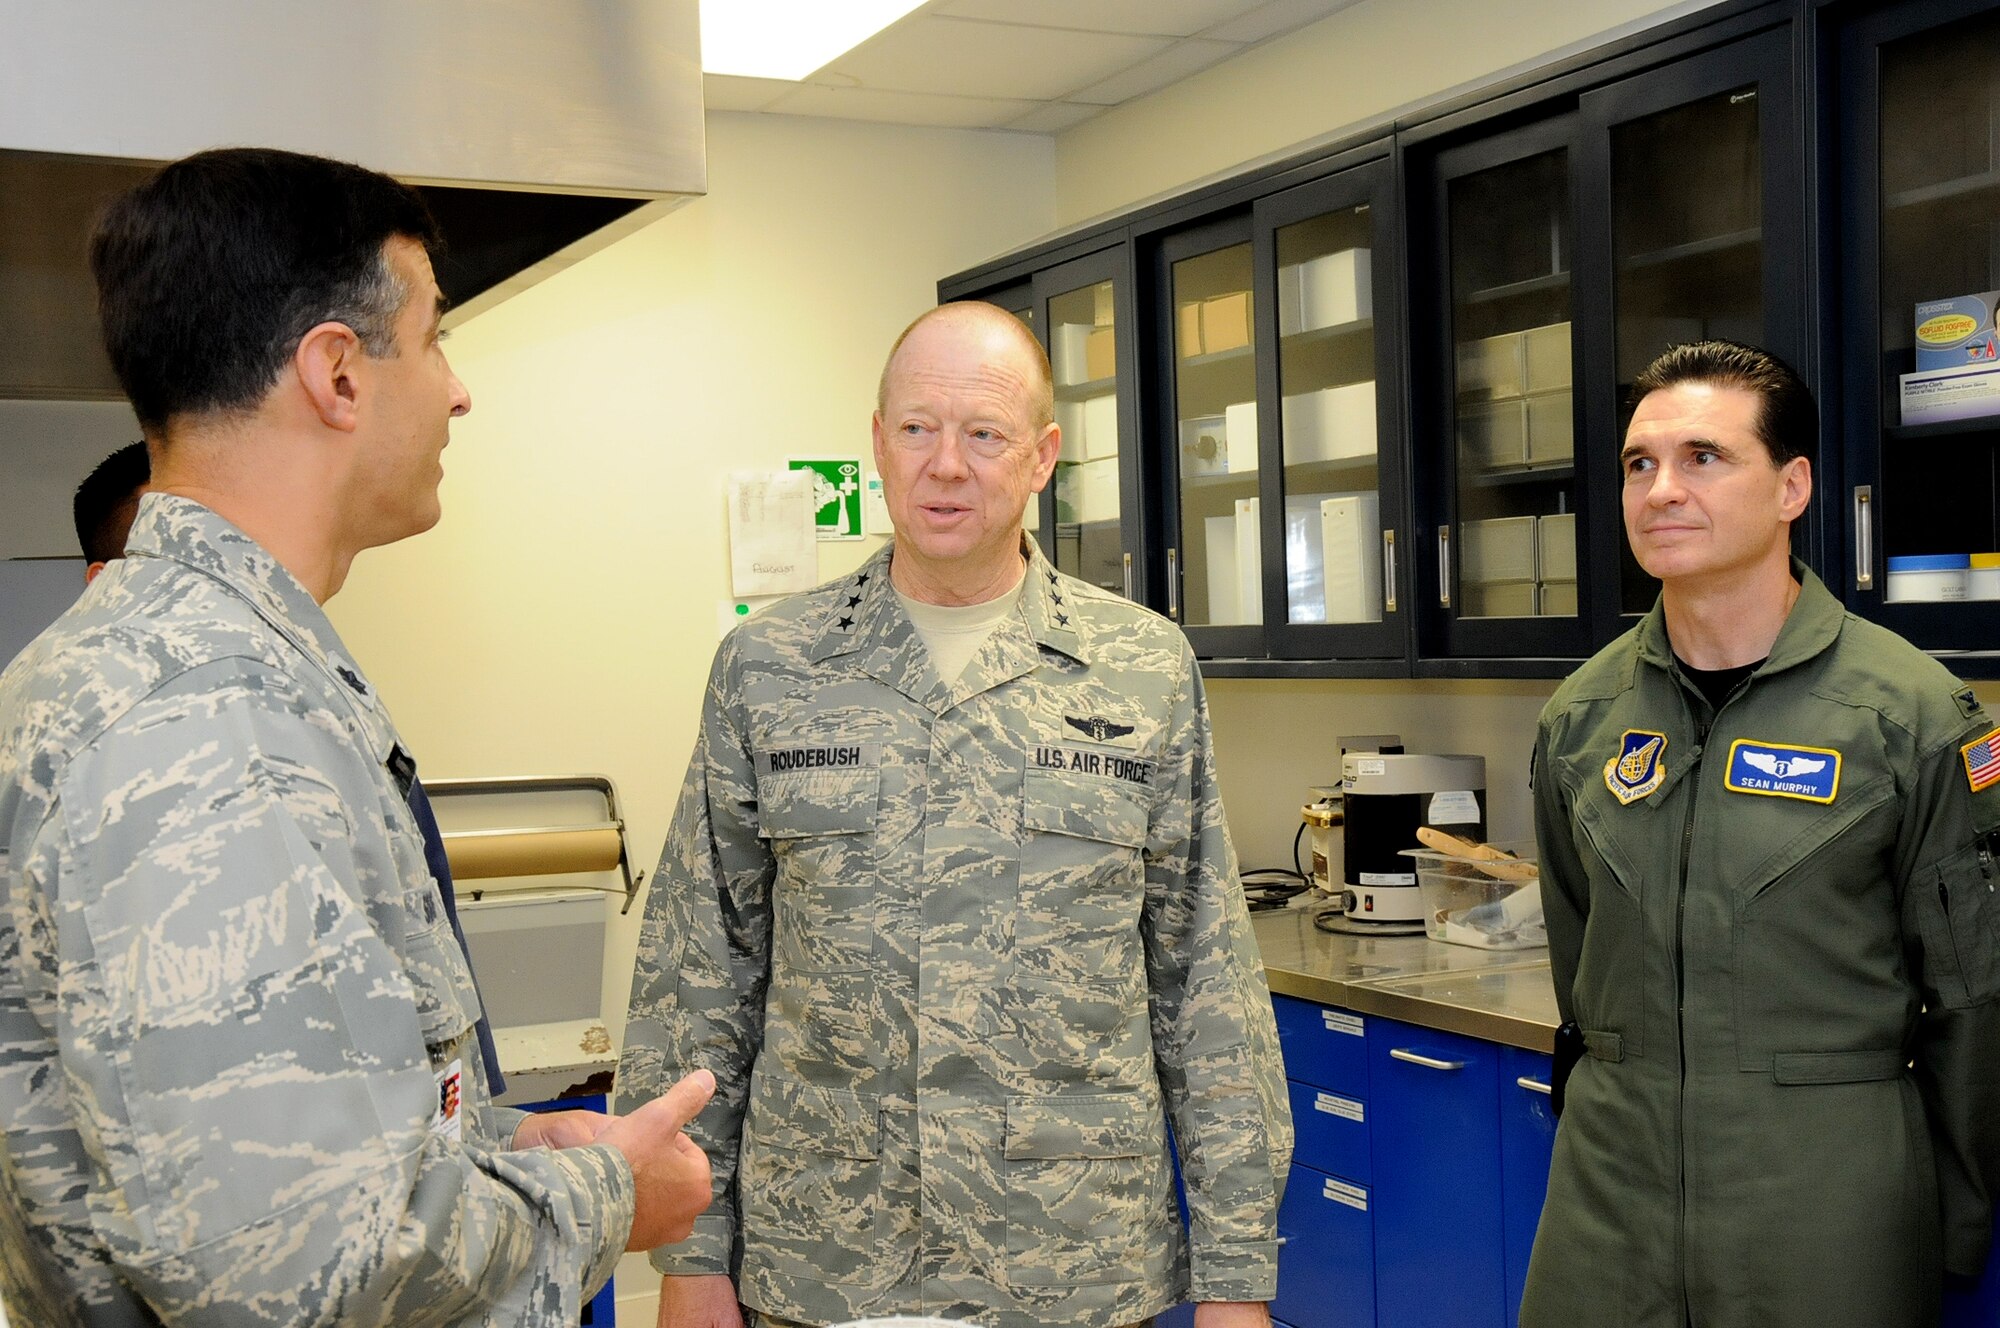 ANDERSEN AIR FORCE BASE, Guam - Lt. Col. Jesus Sojo briefs Lt. Gen. James Roudebush on the capabilities of the dental clinic during a site visit here Jan. 23. (U.S. Air Force photo by Senior Airman Nichelle Griffiths)